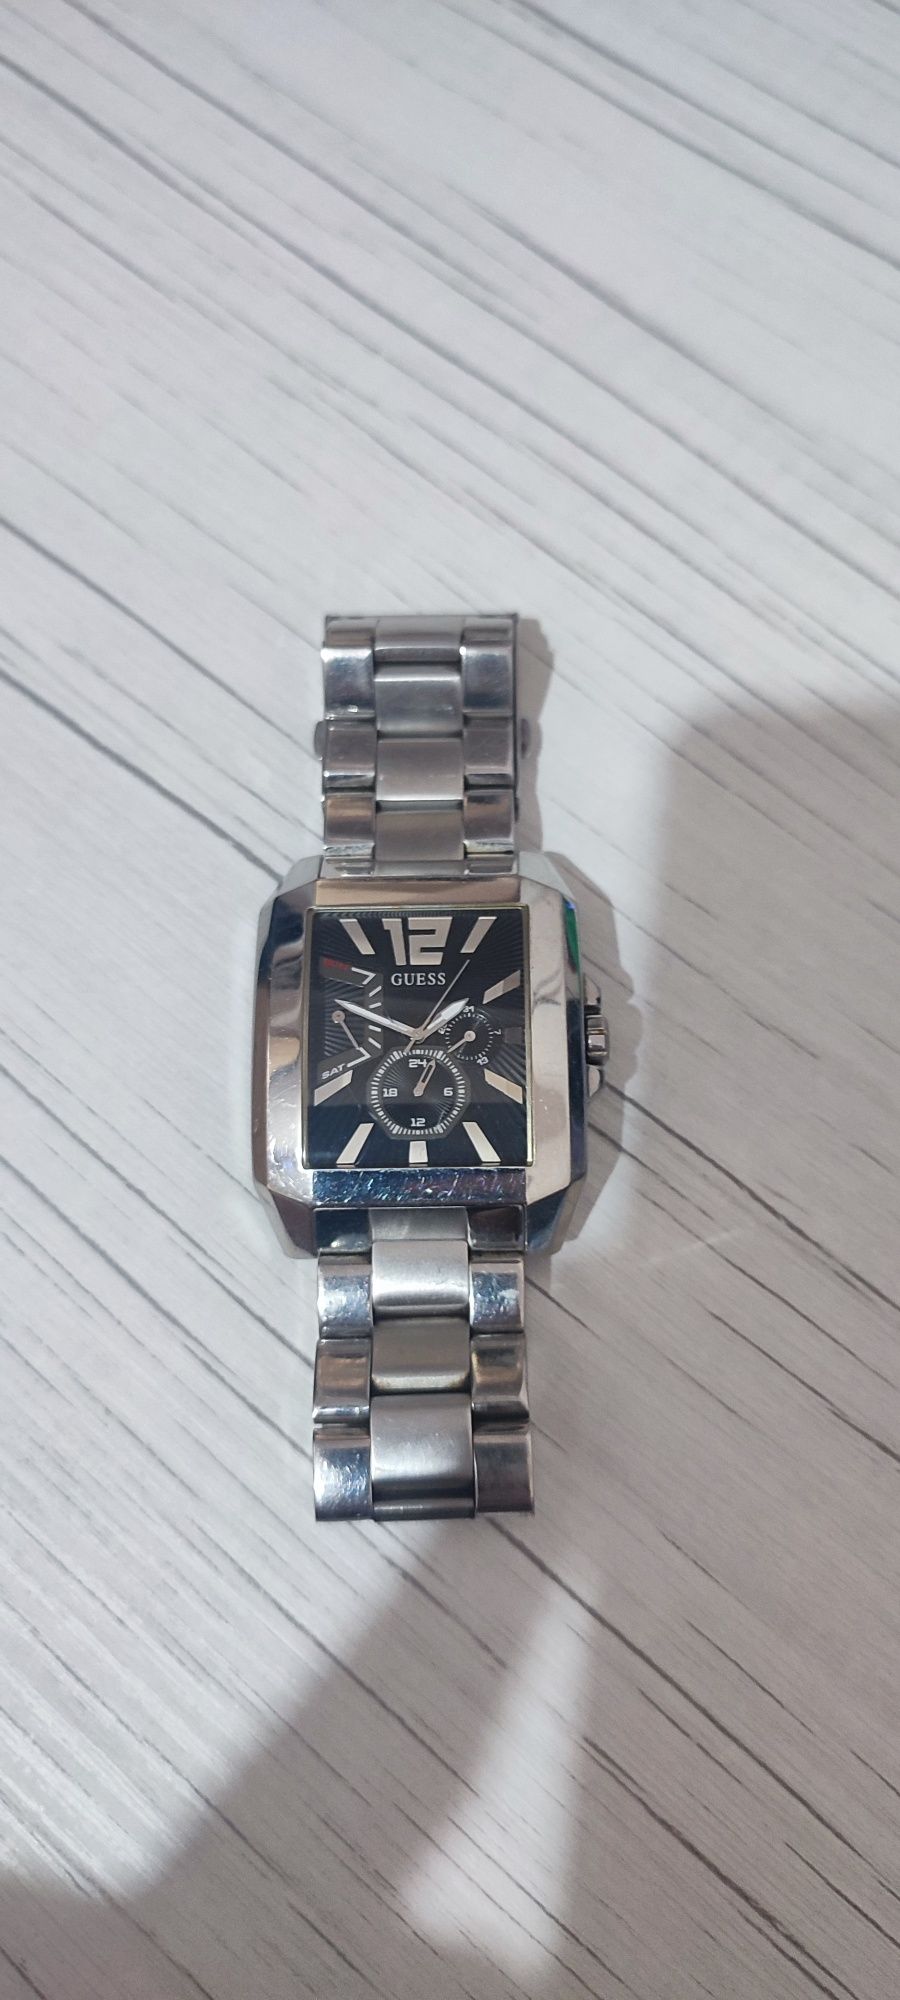 Ceas barbatesc GUESS STRUCTURE W19507G1